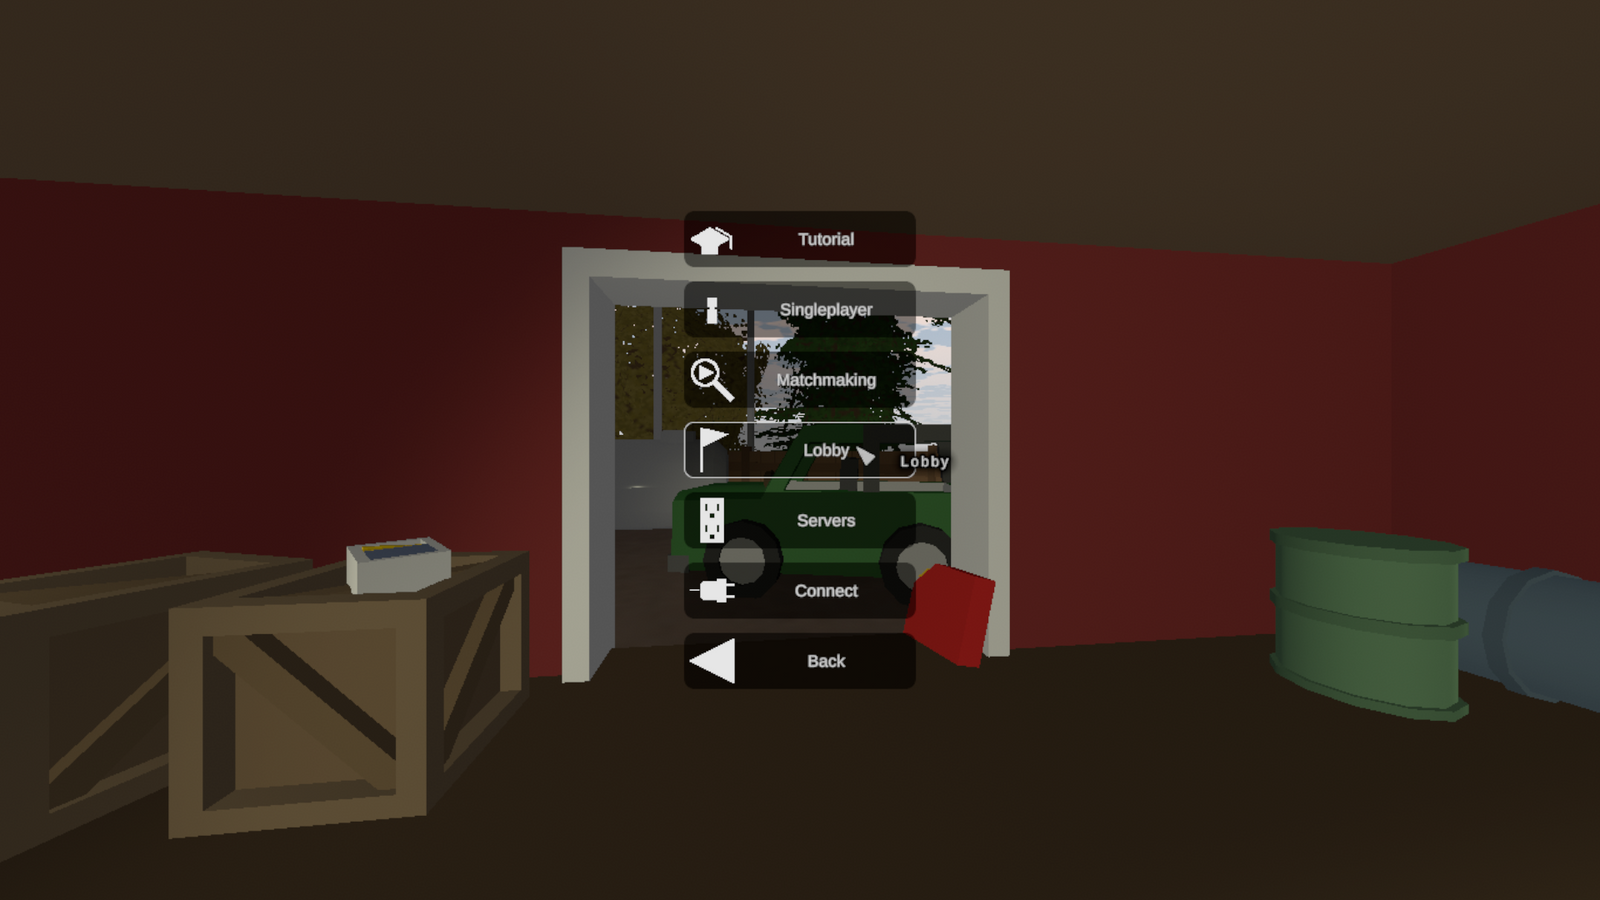 Lobby icon in Unturned